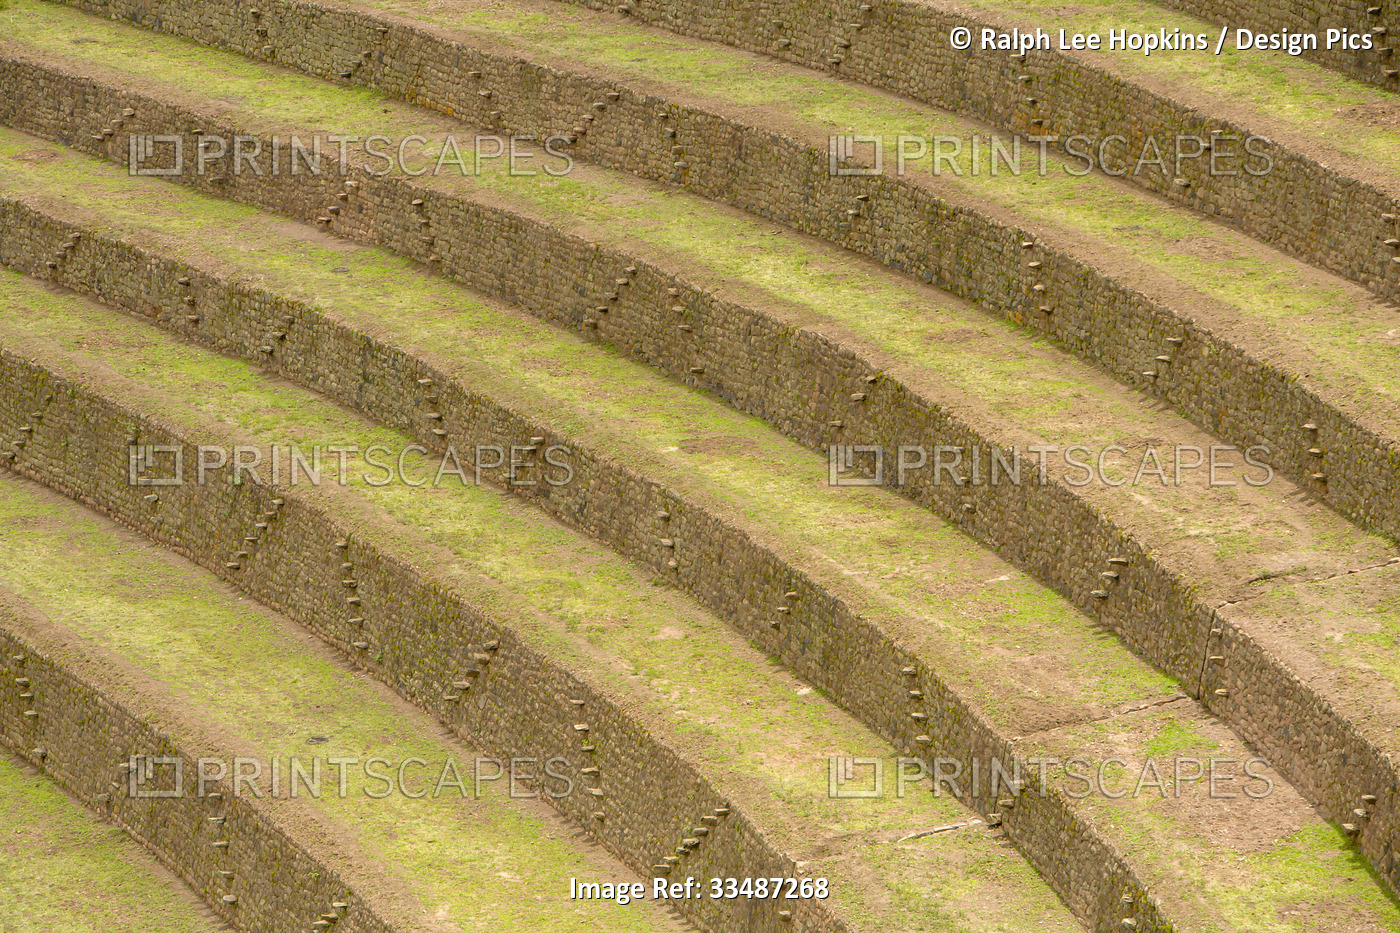 Detail of terraced fields made by pre-Columbian Inca Indians.